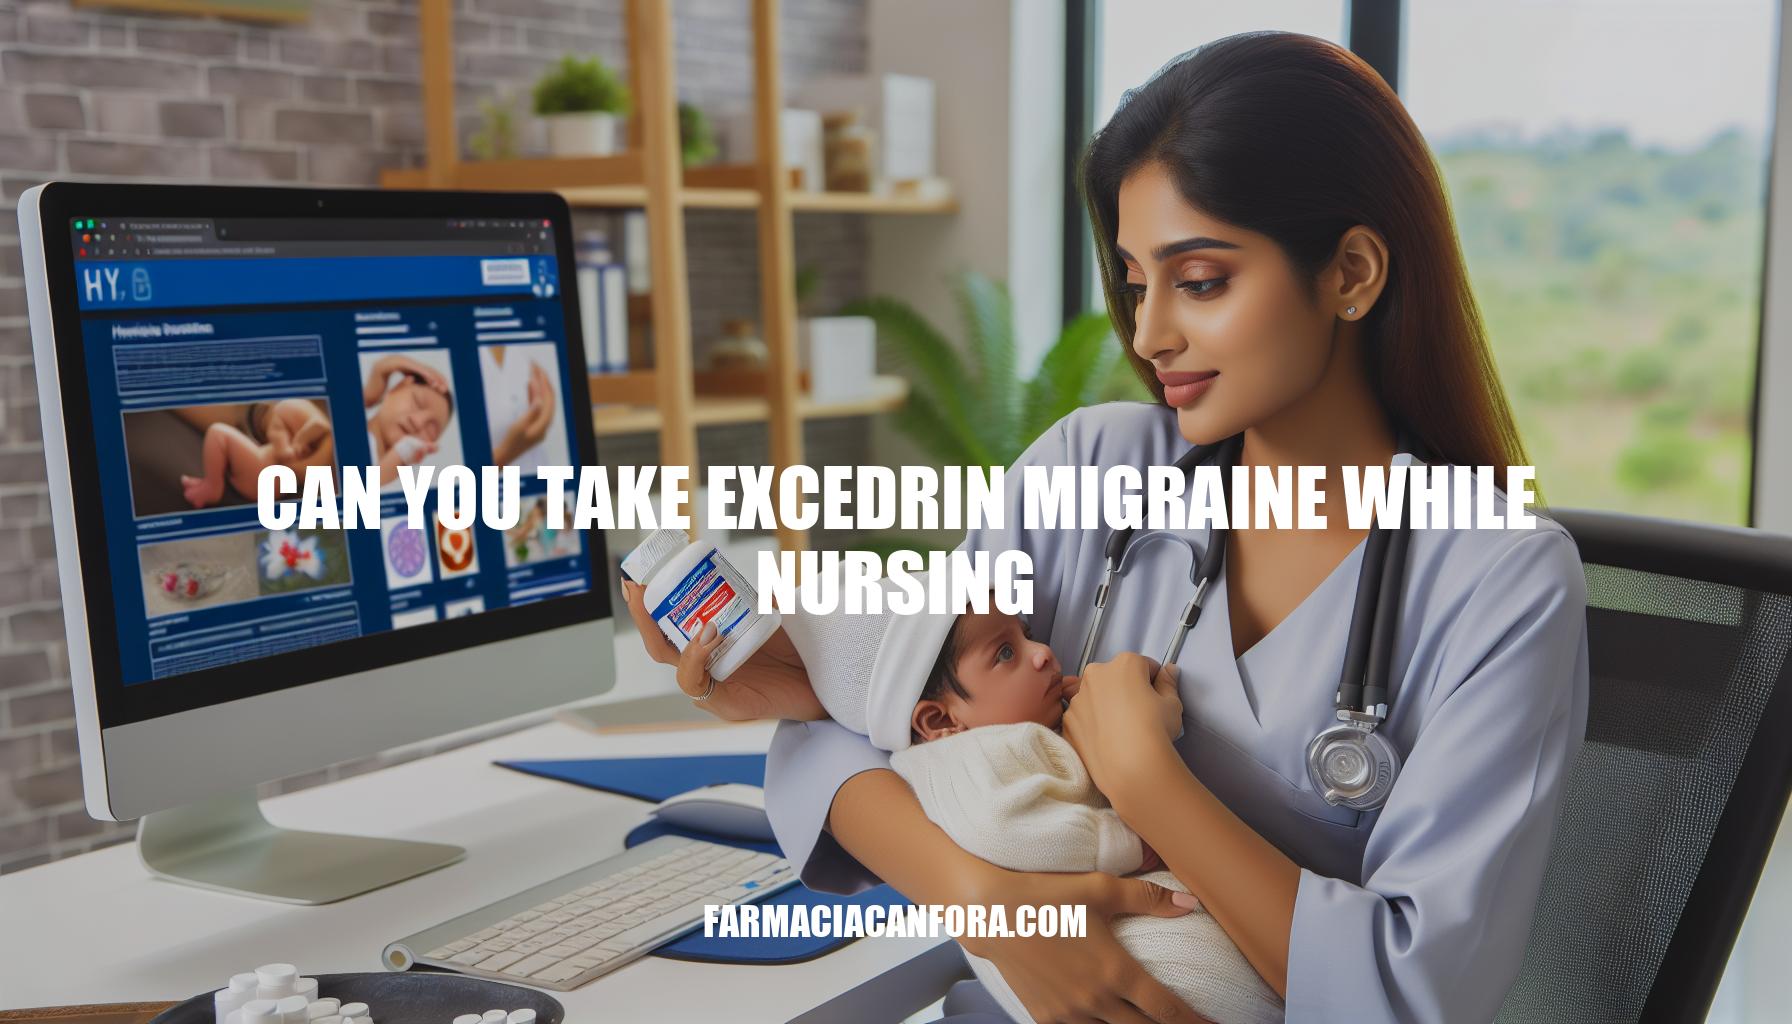 Can You Take Excedrin Migraine While Nursing: Safety Considerations and Alternatives